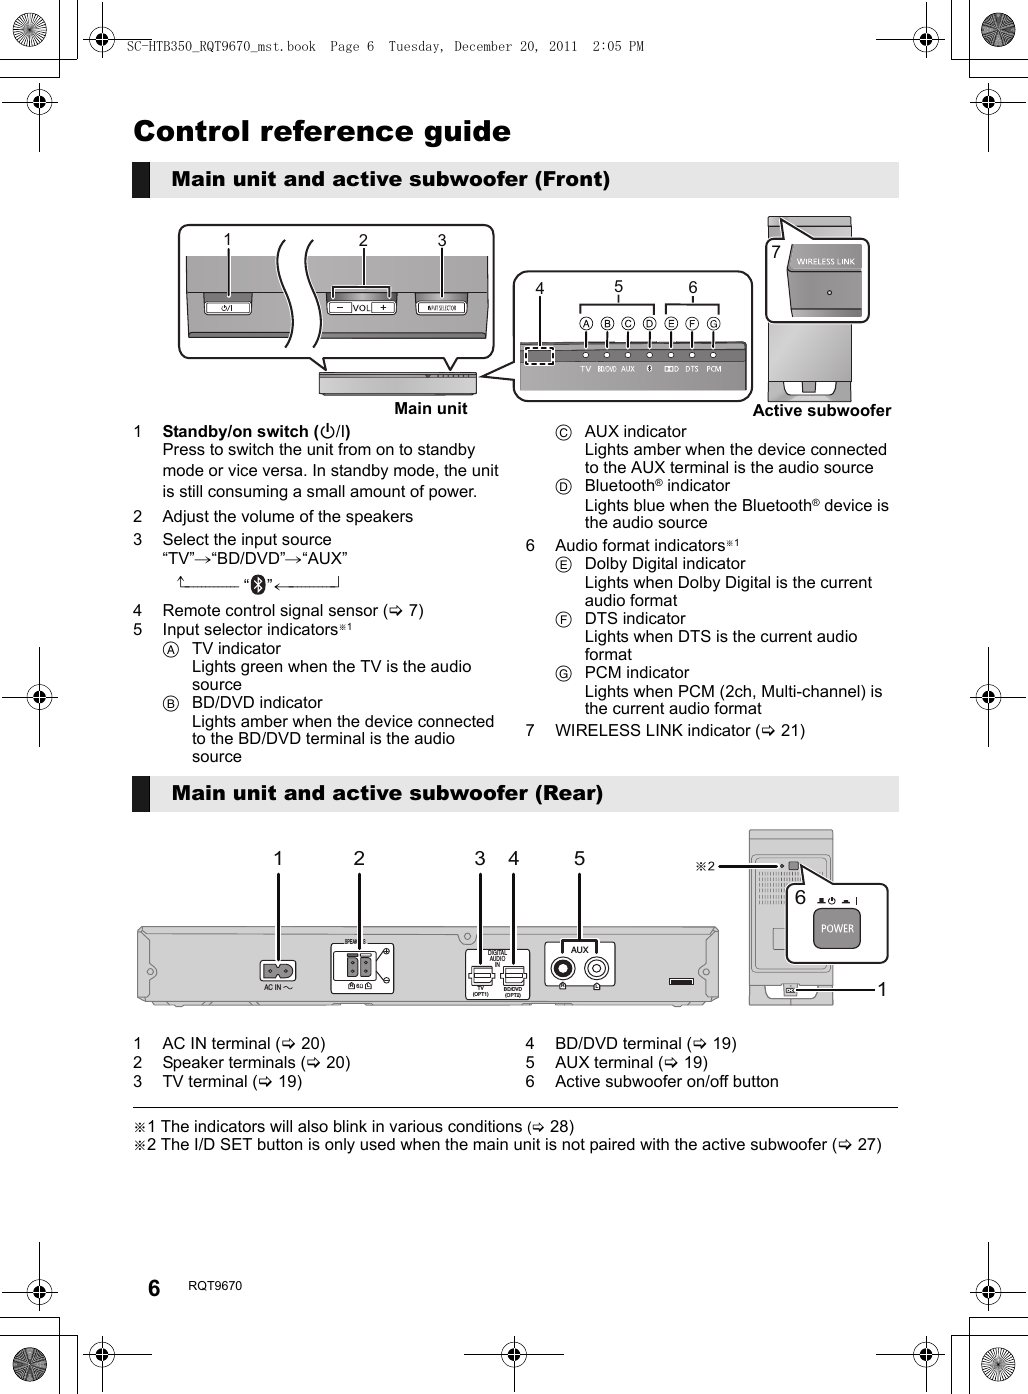 6RQT9670Control reference guide1Standby/on switch (Í/I)Press to switch the unit from on to standby mode or vice versa. In standby mode, the unit is still consuming a small amount of power.2 Adjust the volume of the speakers3 Select the input source“TV”#“BD/DVD”#“AUX”^------------- “”(-----------}4 Remote control signal sensor (&gt;7)5 Input selector indicators§1ATV indicatorLights green when the TV is the audio sourceBBD/DVD indicatorLights amber when the device connected to the BD/DVD terminal is the audio source CAUX indicatorLights amber when the device connected to the AUX terminal is the audio sourceDBluetooth® indicatorLights blue when the Bluetooth® device is the audio source6 Audio format indicators§1EDolby Digital indicatorLights when Dolby Digital is the current audio formatFDTS indicatorLights when DTS is the current audio formatGPCM indicatorLights when PCM (2ch, Multi-channel) is the current audio format7 WIRELESS LINK indicator (&gt;21)1 AC IN terminal (&gt;20)2 Speaker terminals (&gt;20)3 TV terminal (&gt;19)4 BD/DVD terminal (&gt;19)5 AUX terminal (&gt;19)6 Active subwoofer on/off button§1 The indicators will also blink in various conditions (&gt;28)§2 The I/D SET button is only used when the main unit is not paired with the active subwoofer (&gt;27)Main unit and active subwoofer (Front)7125634Main unit Active subwooferMain unit and active subwoofer (Rear)1 21346SPEAKERS 6R LDIGITALAUDIOINTV(OPT1)BD/DVD(OPT2)AC INAUXRL5   SC-HTB350_RQT9670_mst.book  Page 6  Tuesday, December 20, 2011  2:05 PM